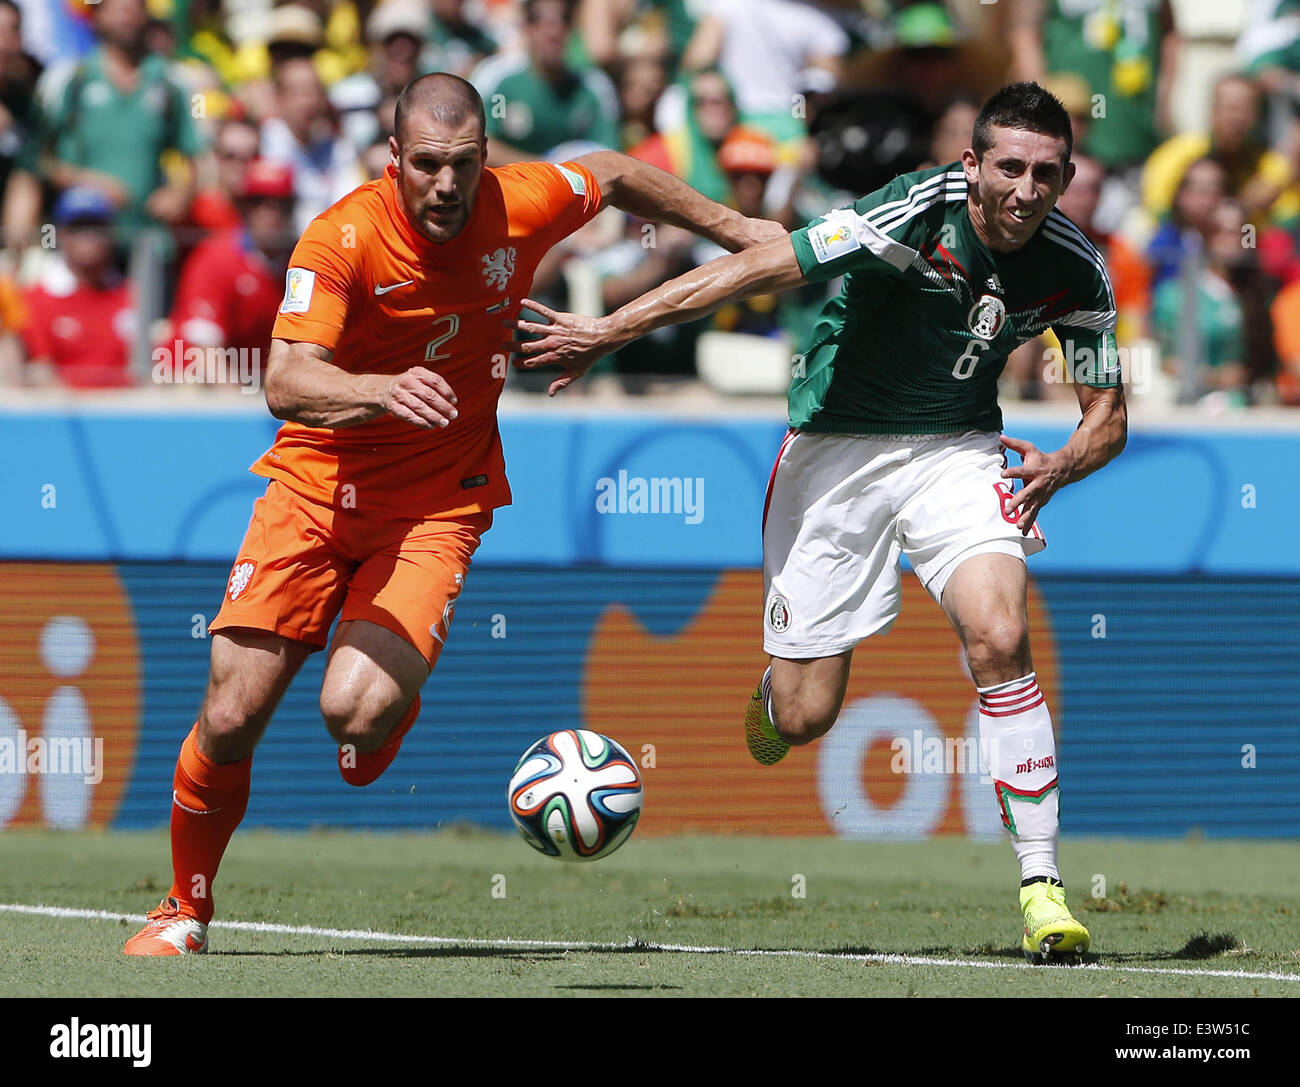 Fortaleza, Brazil. 29th June, 2014. Mexico's Hector Herrera vies with Netherlands's Ron Vlaar during a Round of 16 match between Netherlands and Mexico of 2014 FIFA World Cup at the Estadio Castelao Stadium in Fortaleza, Brazil, on June 29, 2014. Credit:  Zhou Lei/Xinhua/Alamy Live News Stock Photo